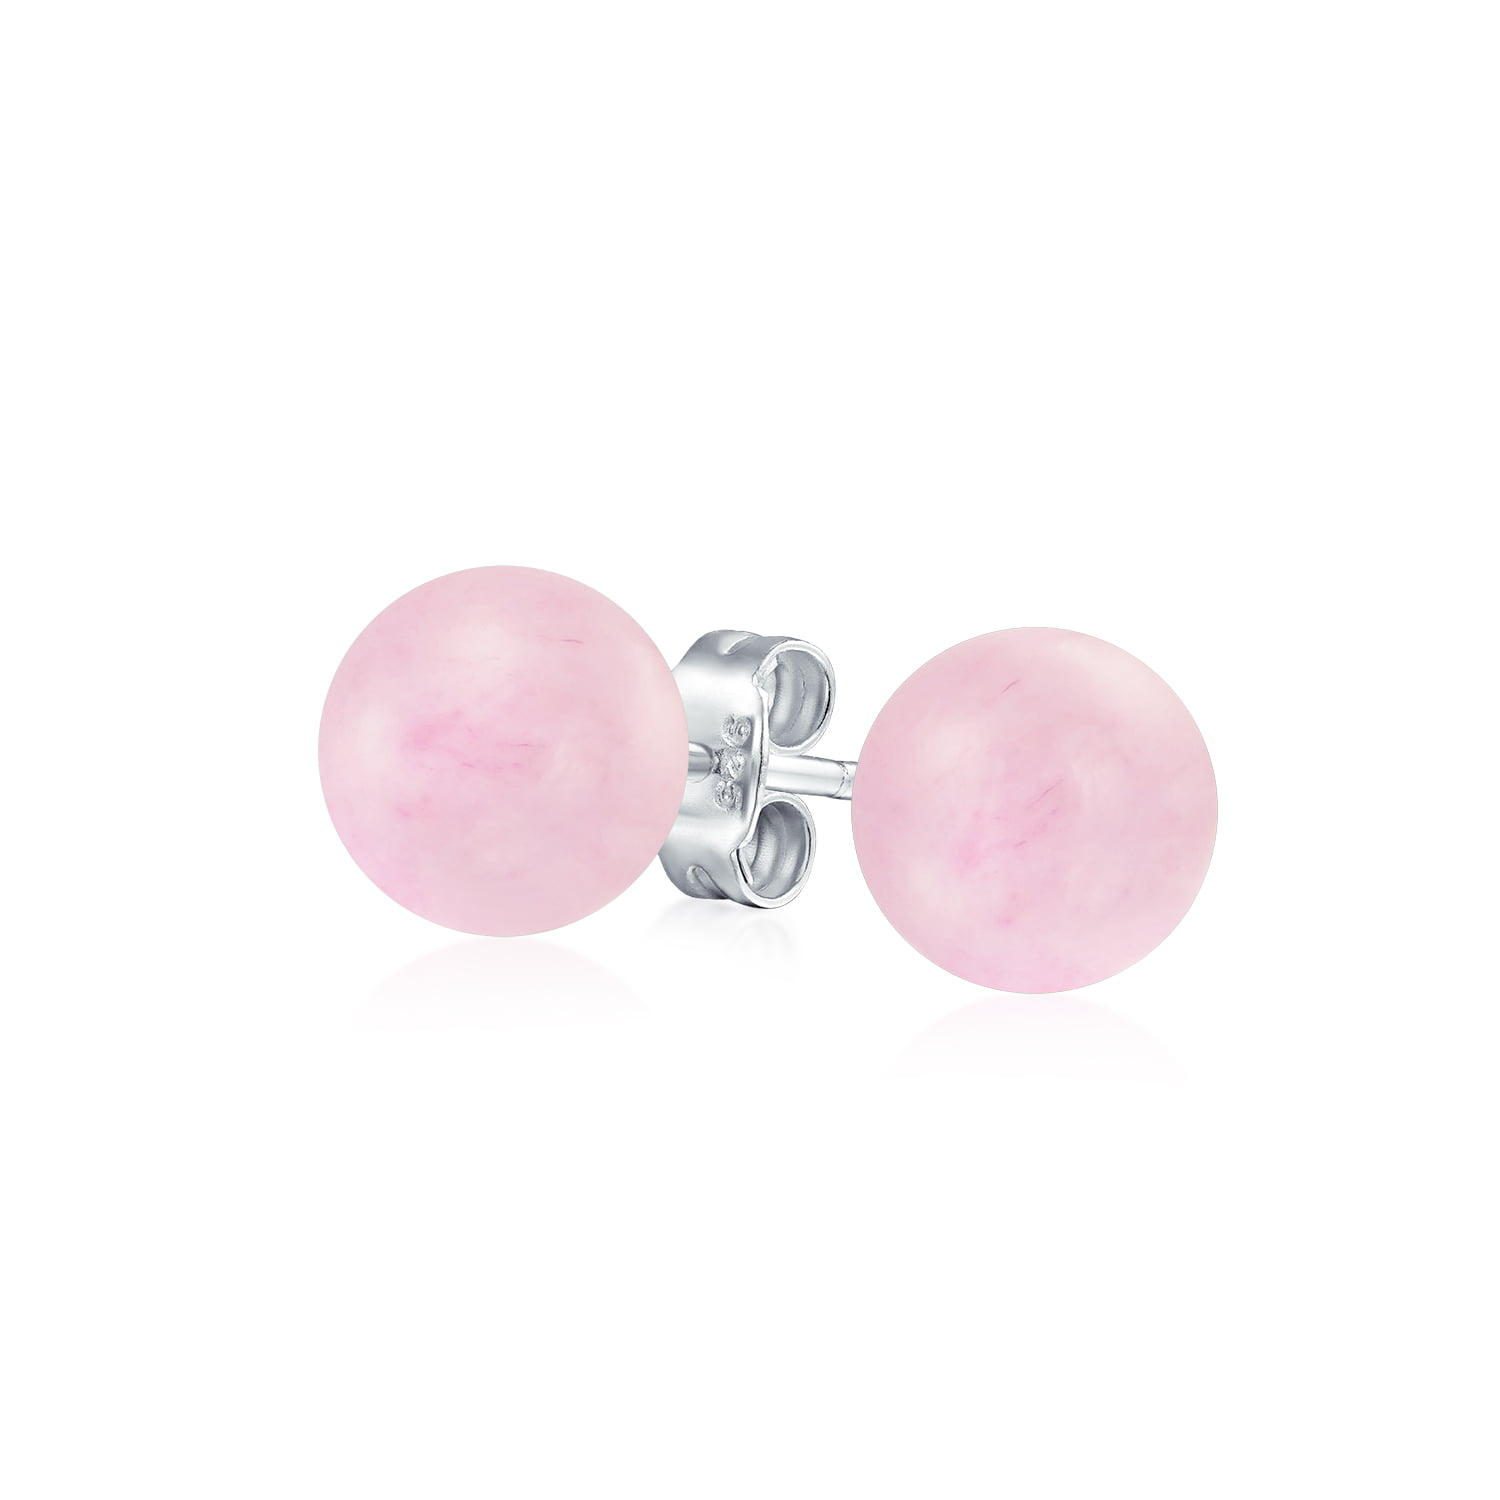 pair Stainless Steel Flower Paint Pink Acrylic Bead Ball 2 Color Stud Earrings 